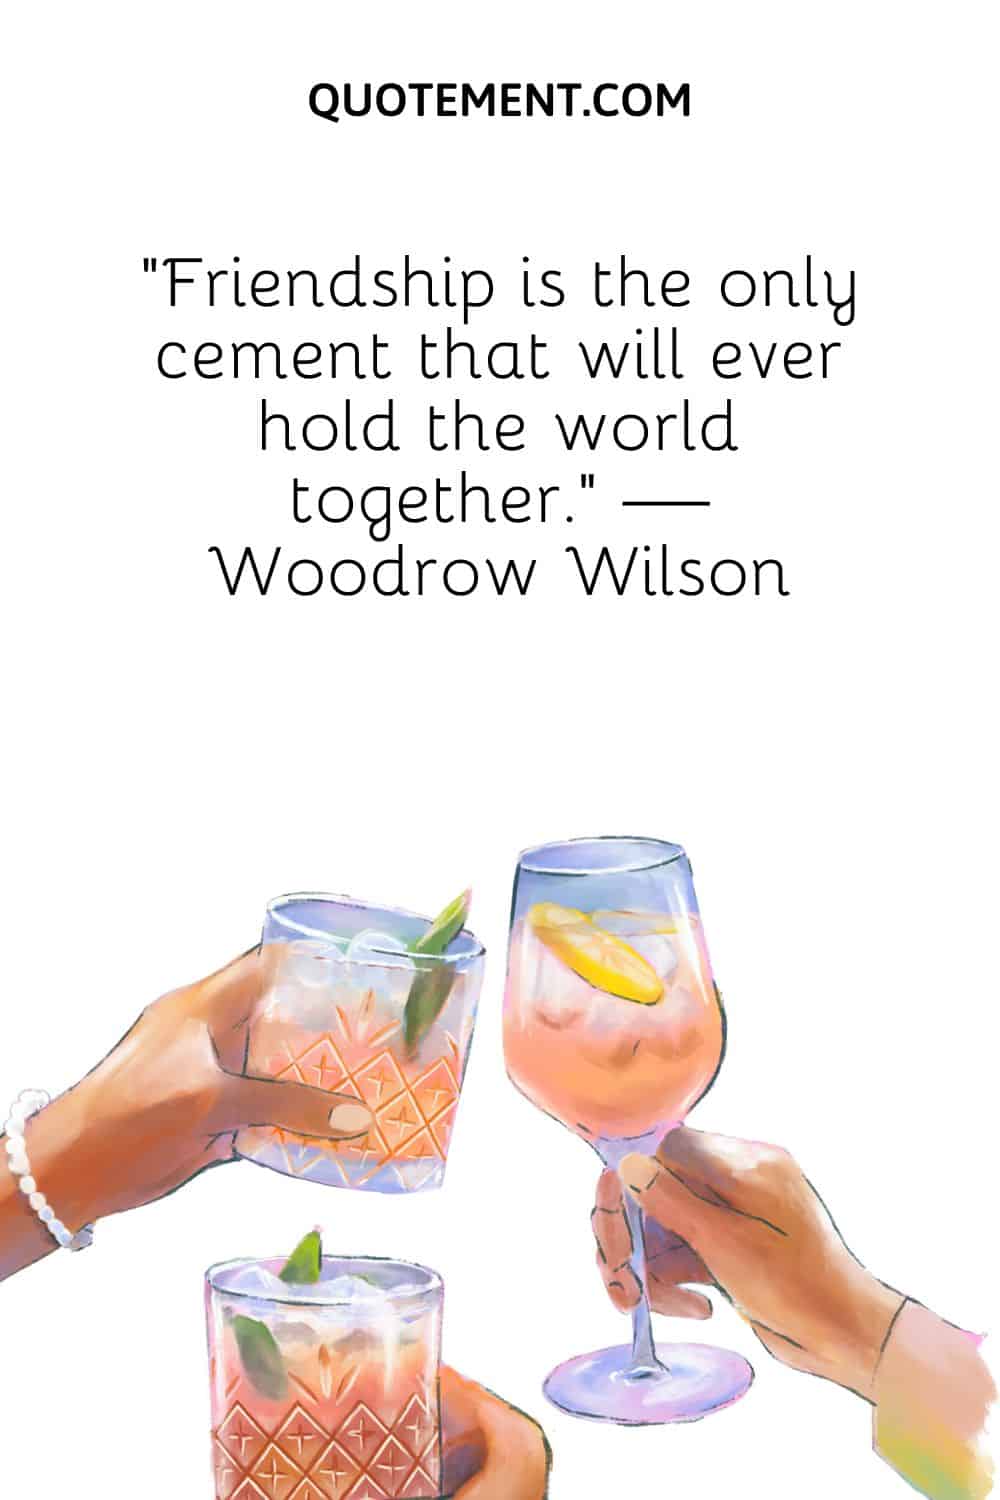 “Friendship is the only cement that will ever hold the world together.” — Woodrow Wilson